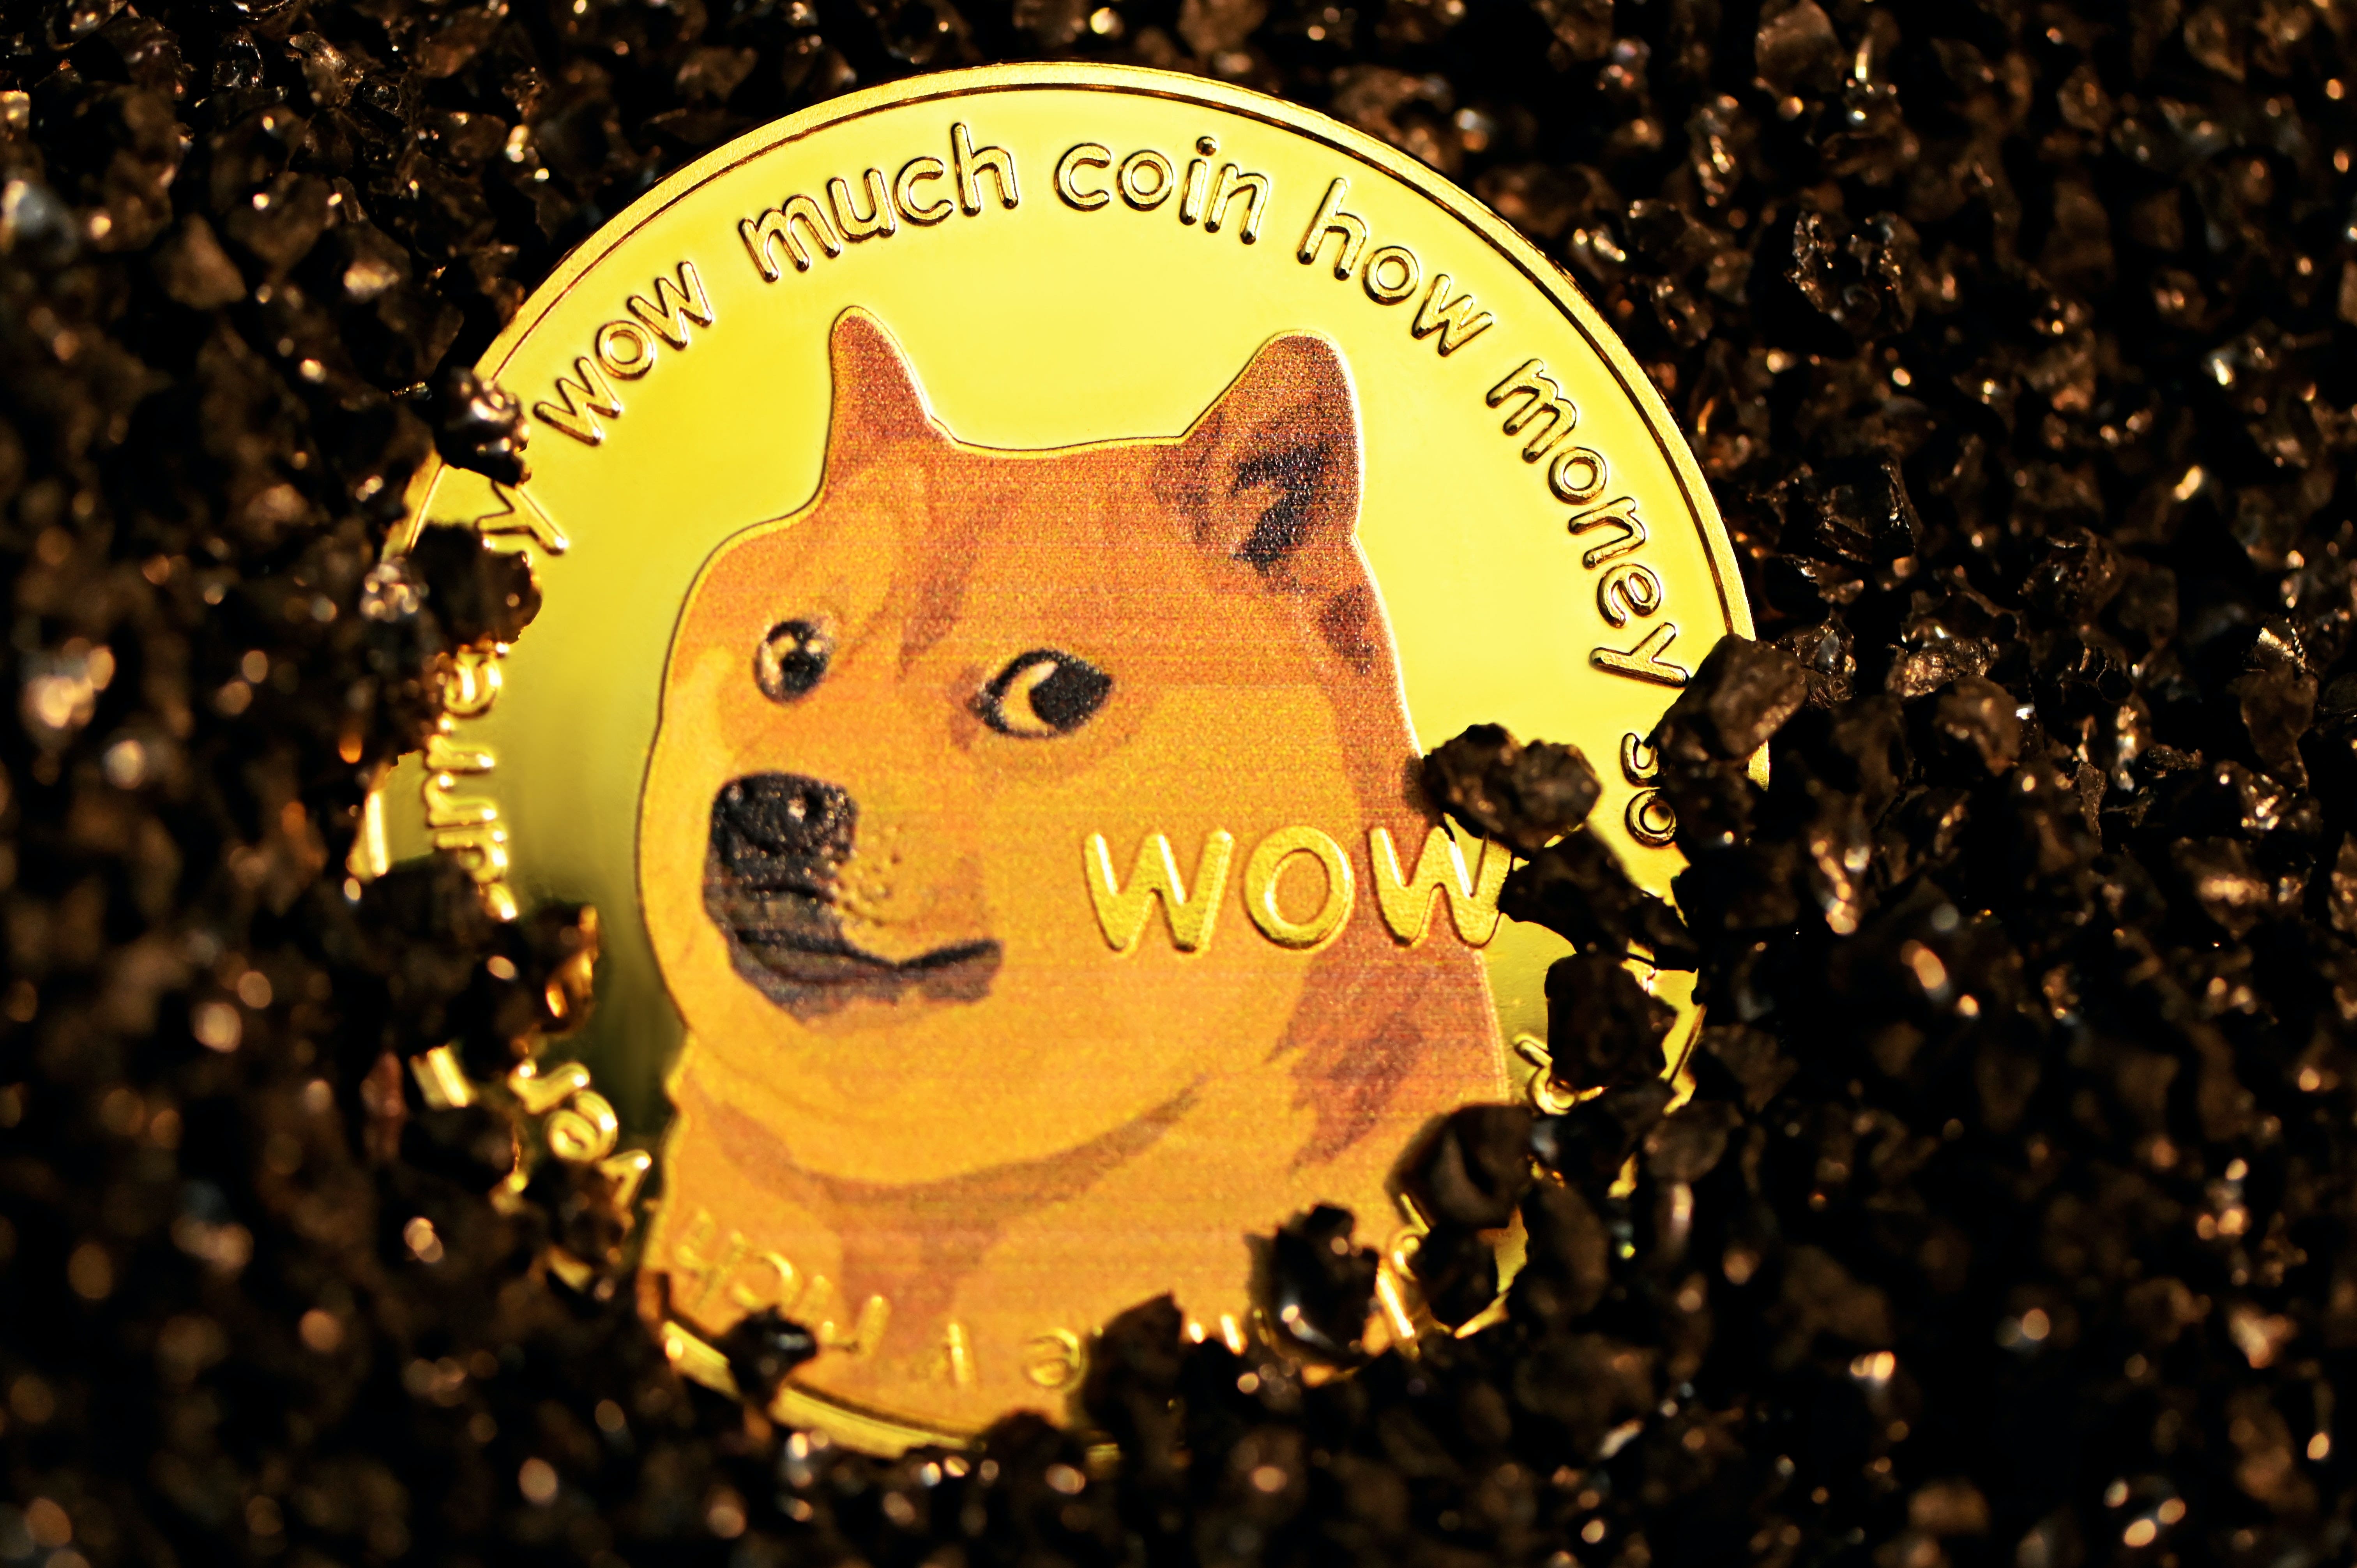 This Louisville Cafe Is Rebranding As 'Dogebean' And Will Accept Payments In Dogecoin